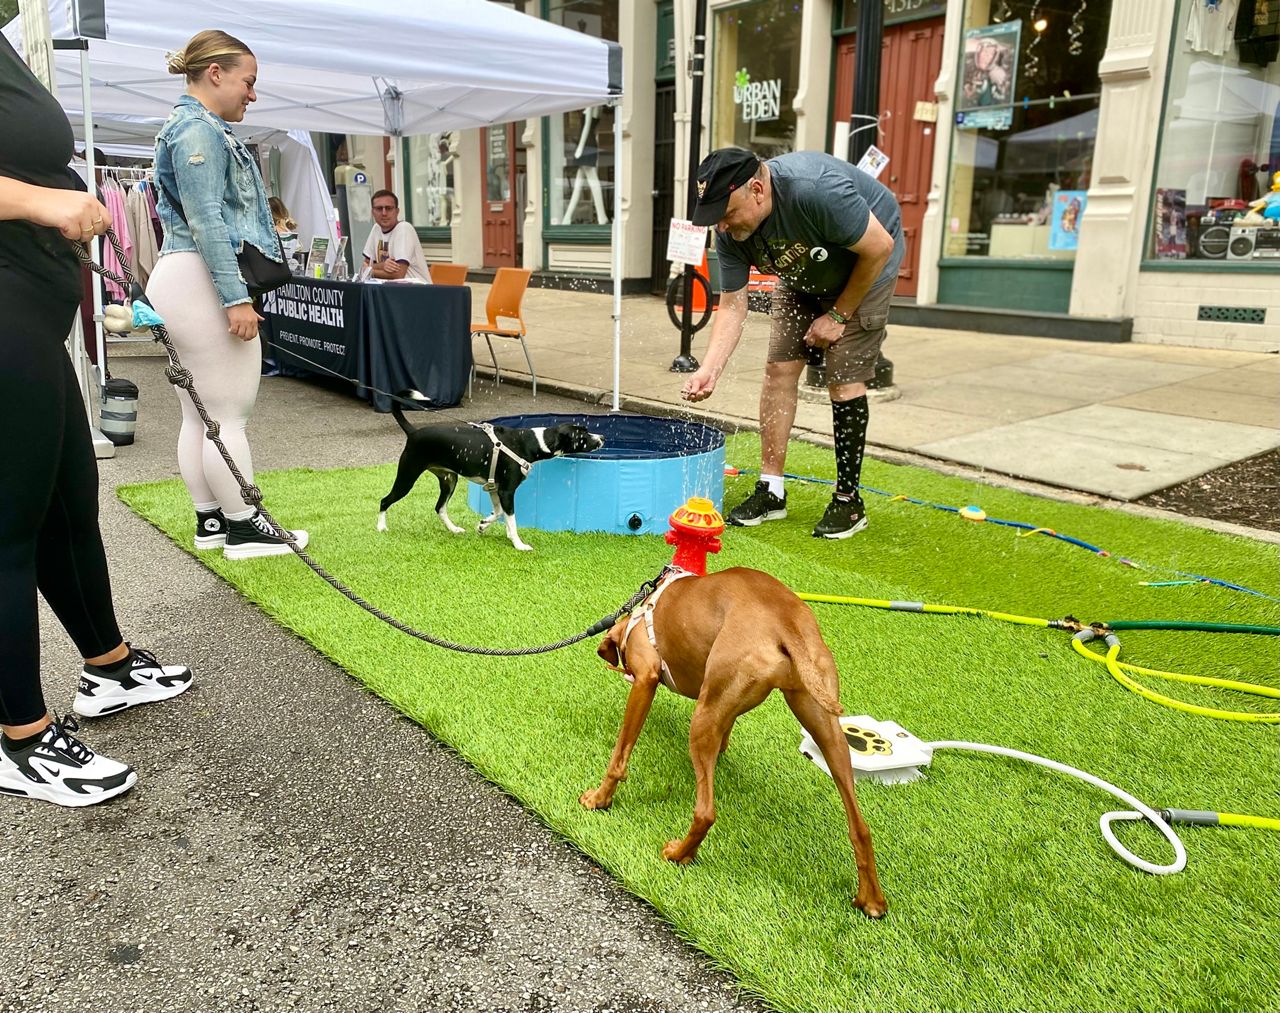 Second Sunday on Main includes musical acts, artists, food and other forms of entertainment. There's even a space for dogs. (Spectrum News 1/Casey Weldon)